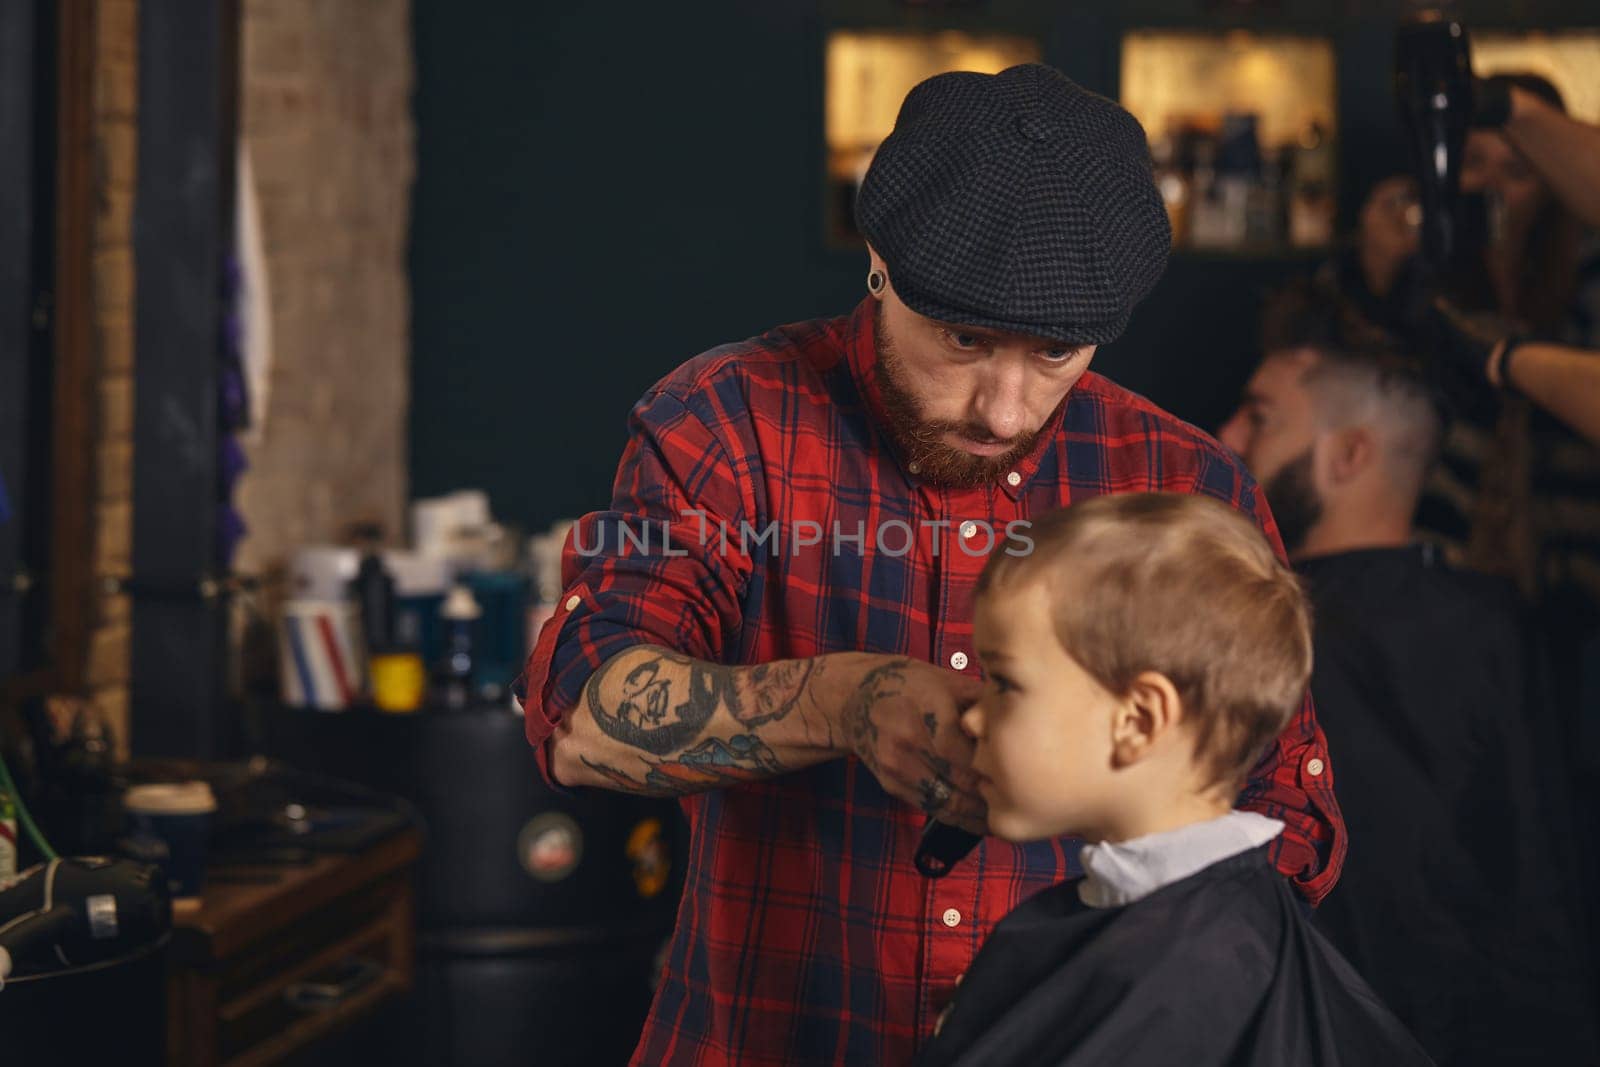 A pretty blonde boy happy to be on the haircut with a professional hairdresser. Blond little boy having a haircut at hair salon. Hairdresser's hands making hairstyle to child at barbershop